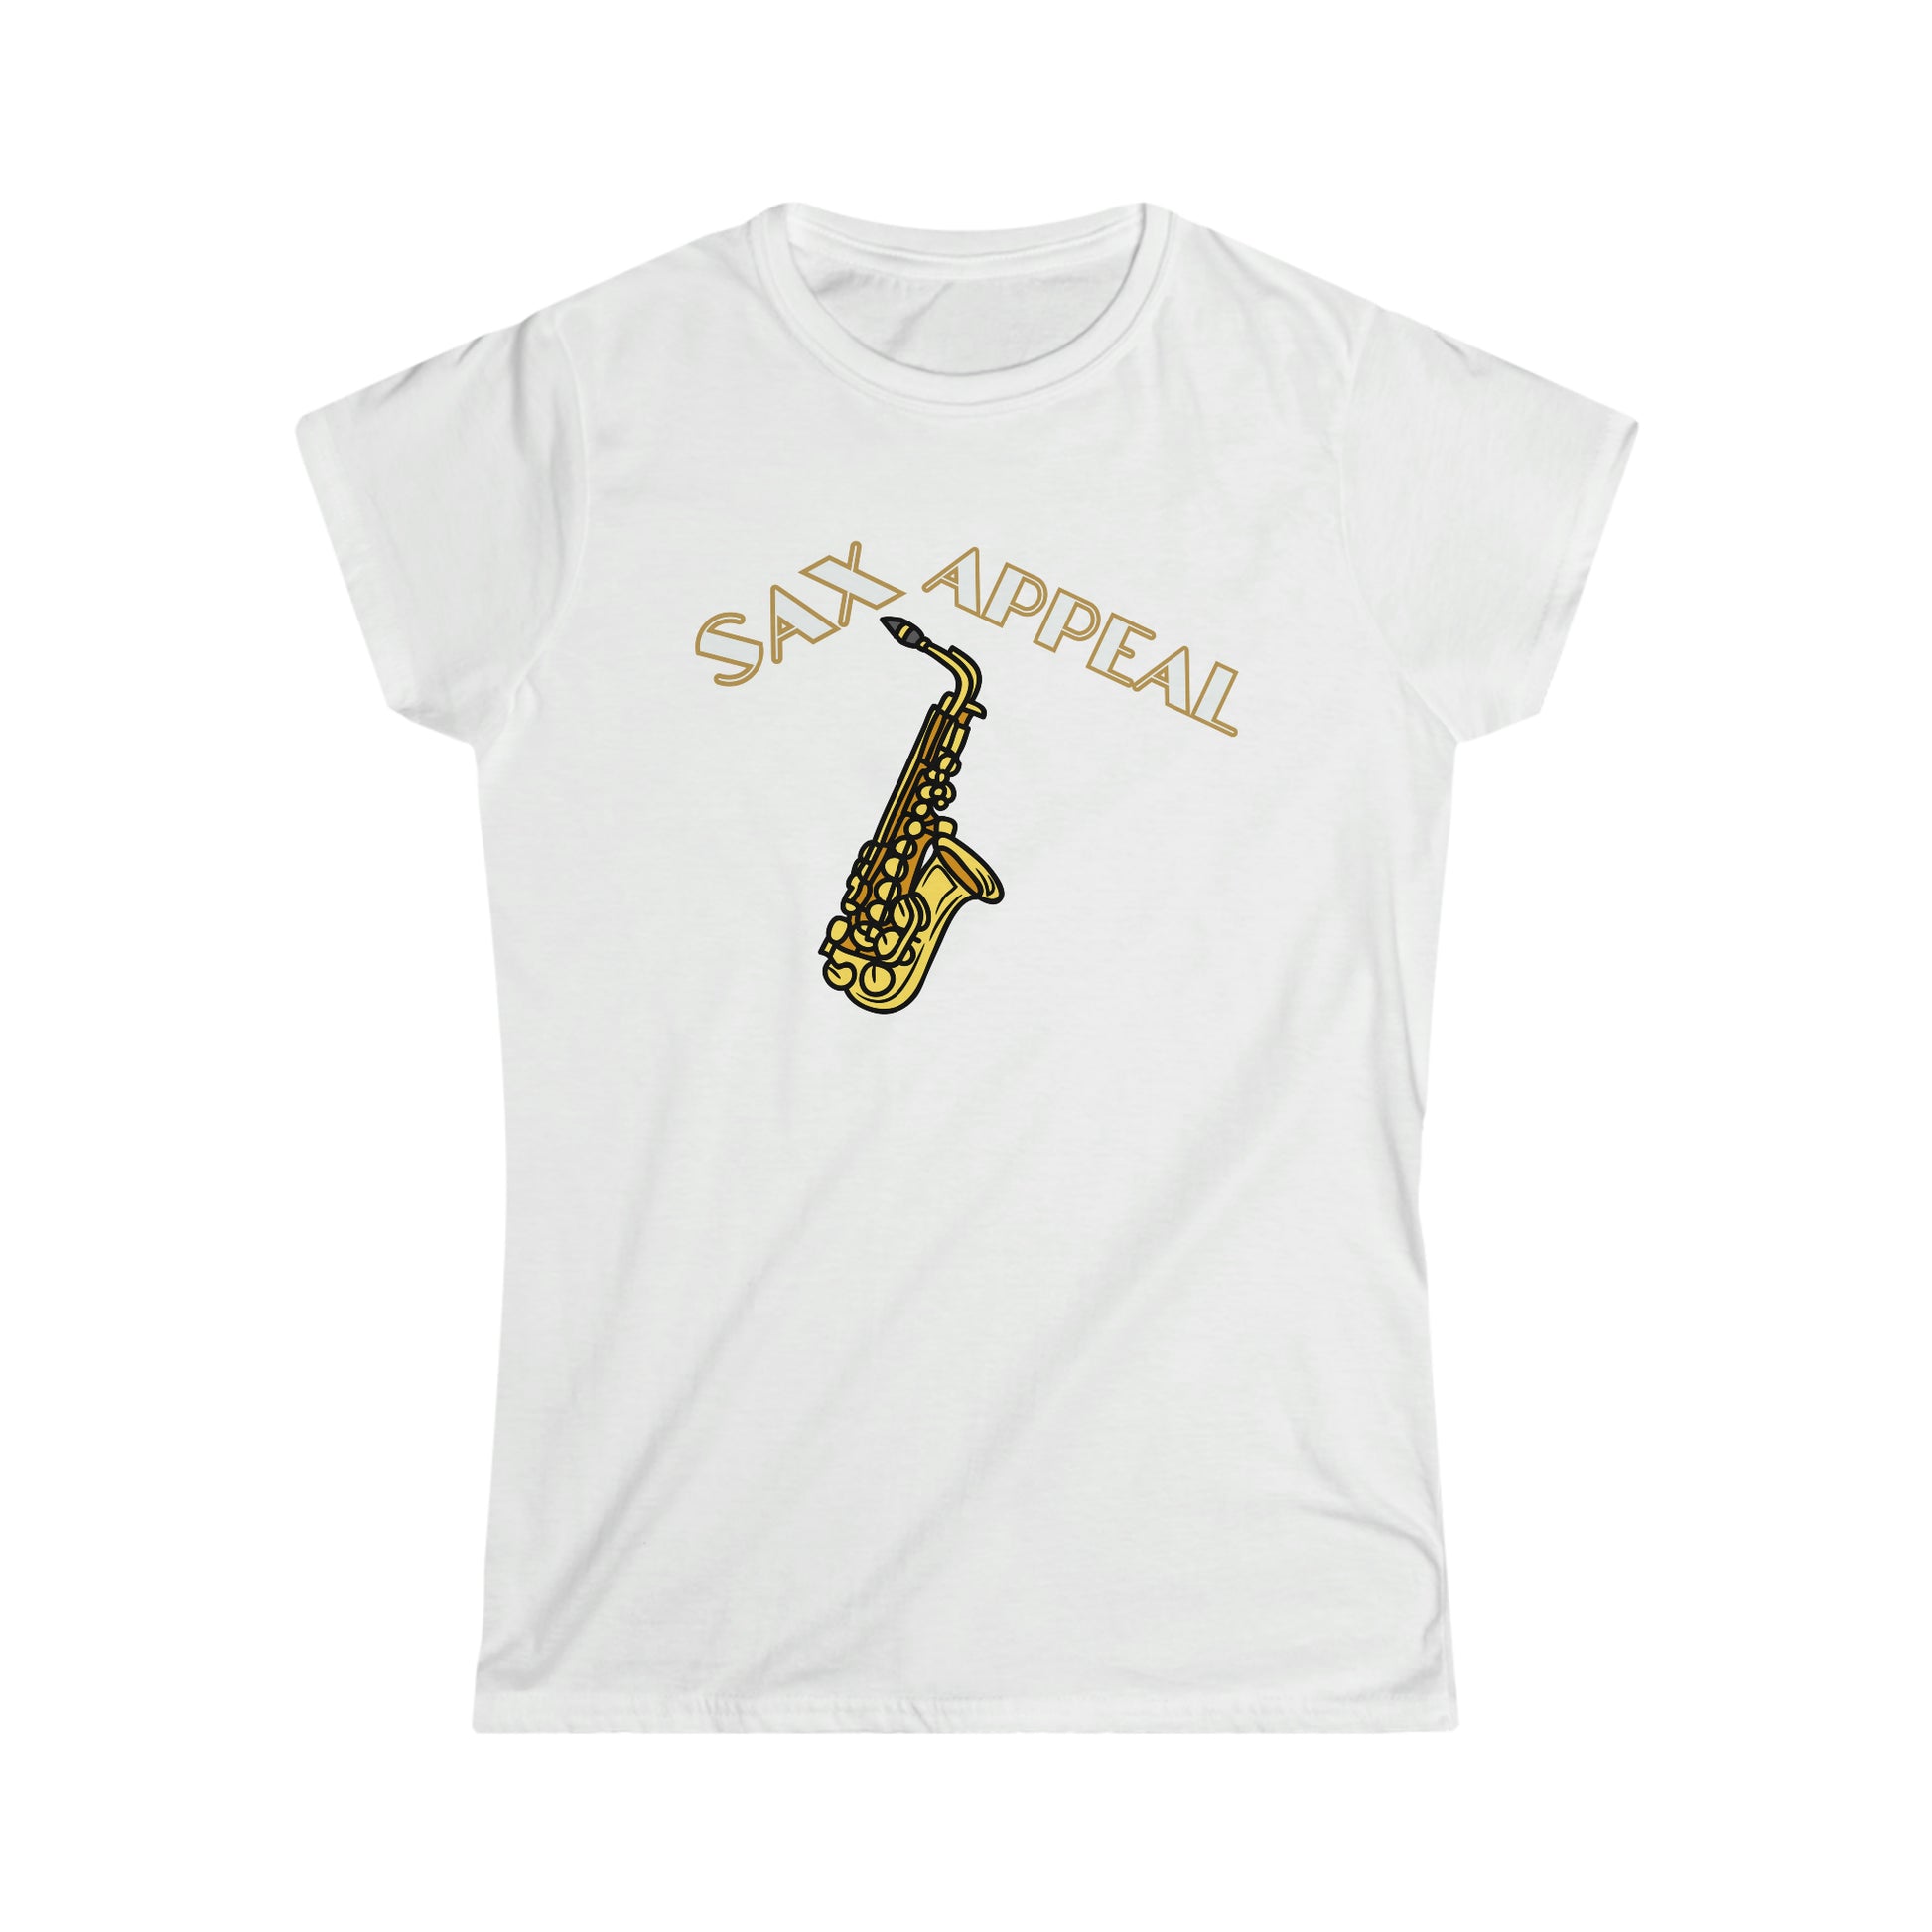 A T-shirt with the text "Sax appeal" with a retro font and a picture of saxophone